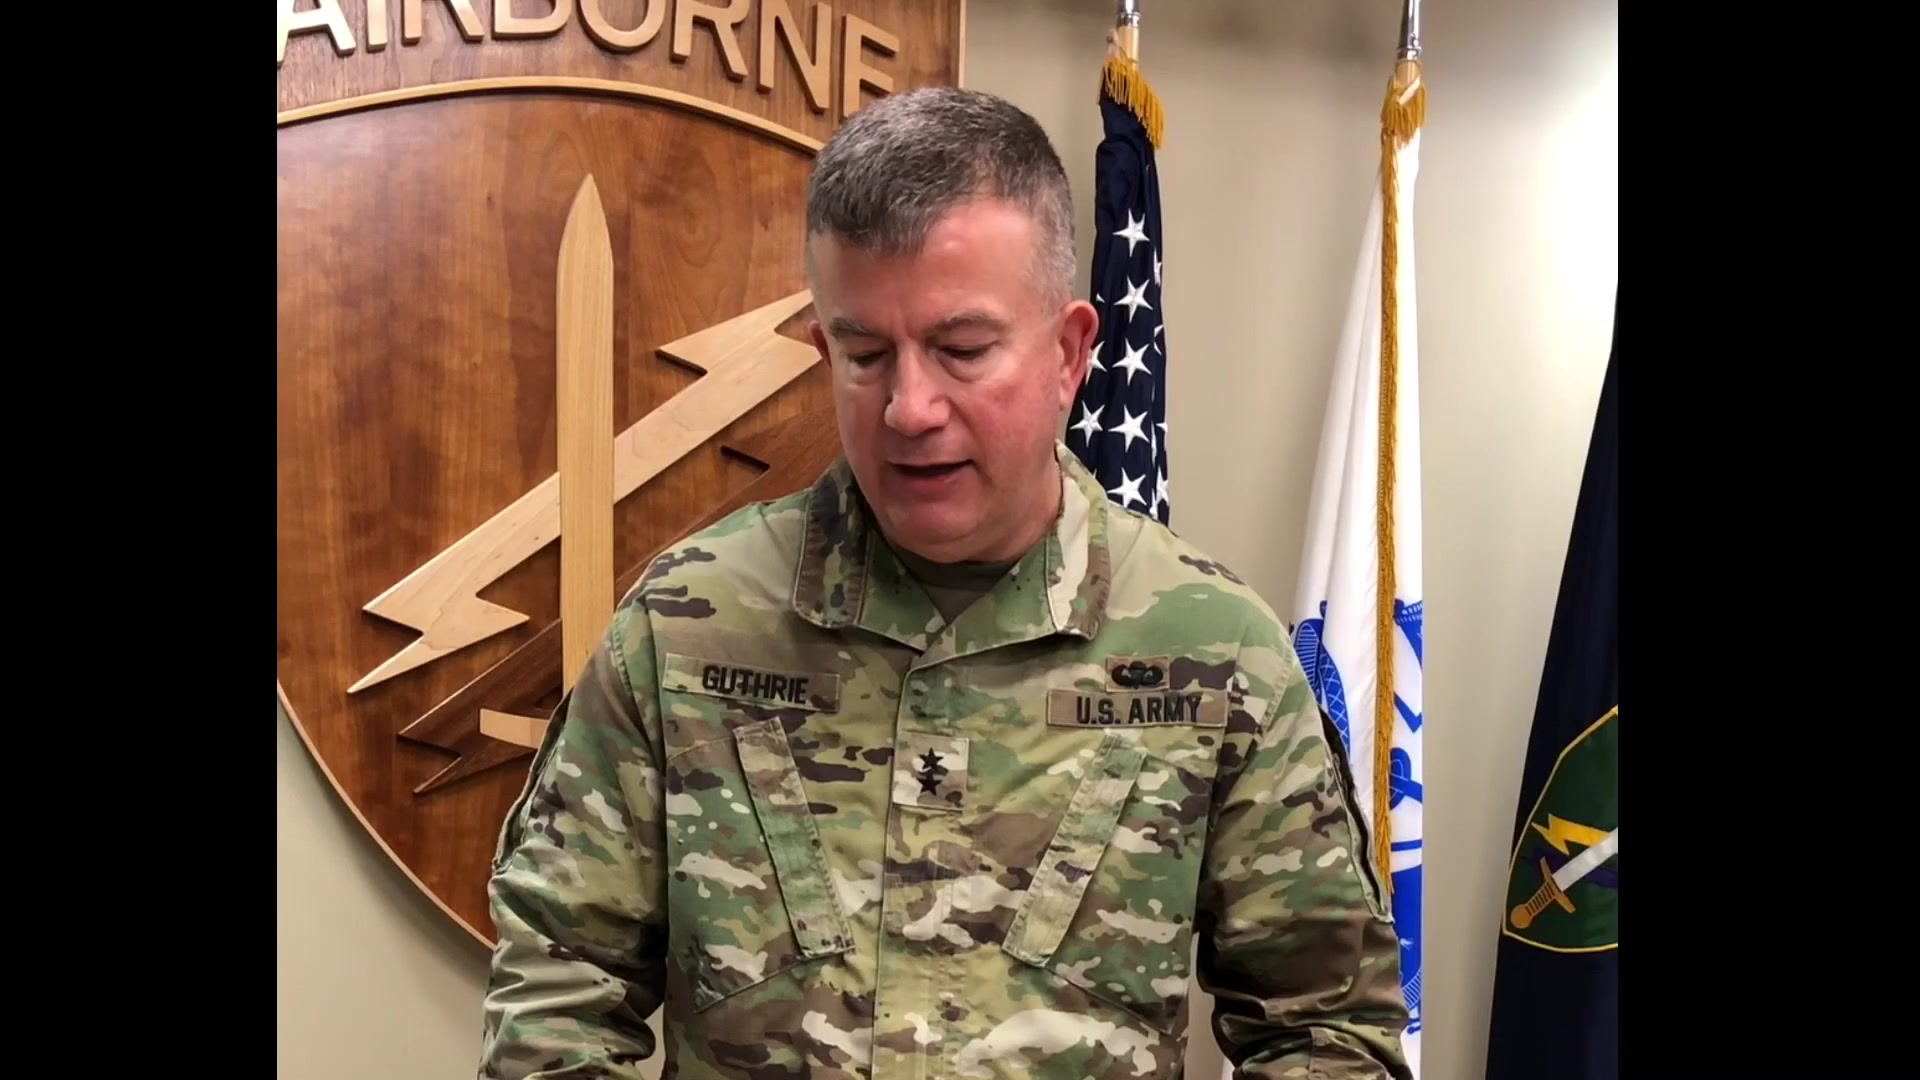 The 353 Civil Affairs Command conducted a virtual Change of Command from Brig. Gen. Robert S. Cooley to Brig. Gen. Timothy Brennan 22 April 2020. Let us welcome Brig. Gen. Brennan as the new commander of 353 CACOM. Brig. Gen. Cooley moves on the become the chief of staff at Army Reserve Headquarters - Fort Bragg.